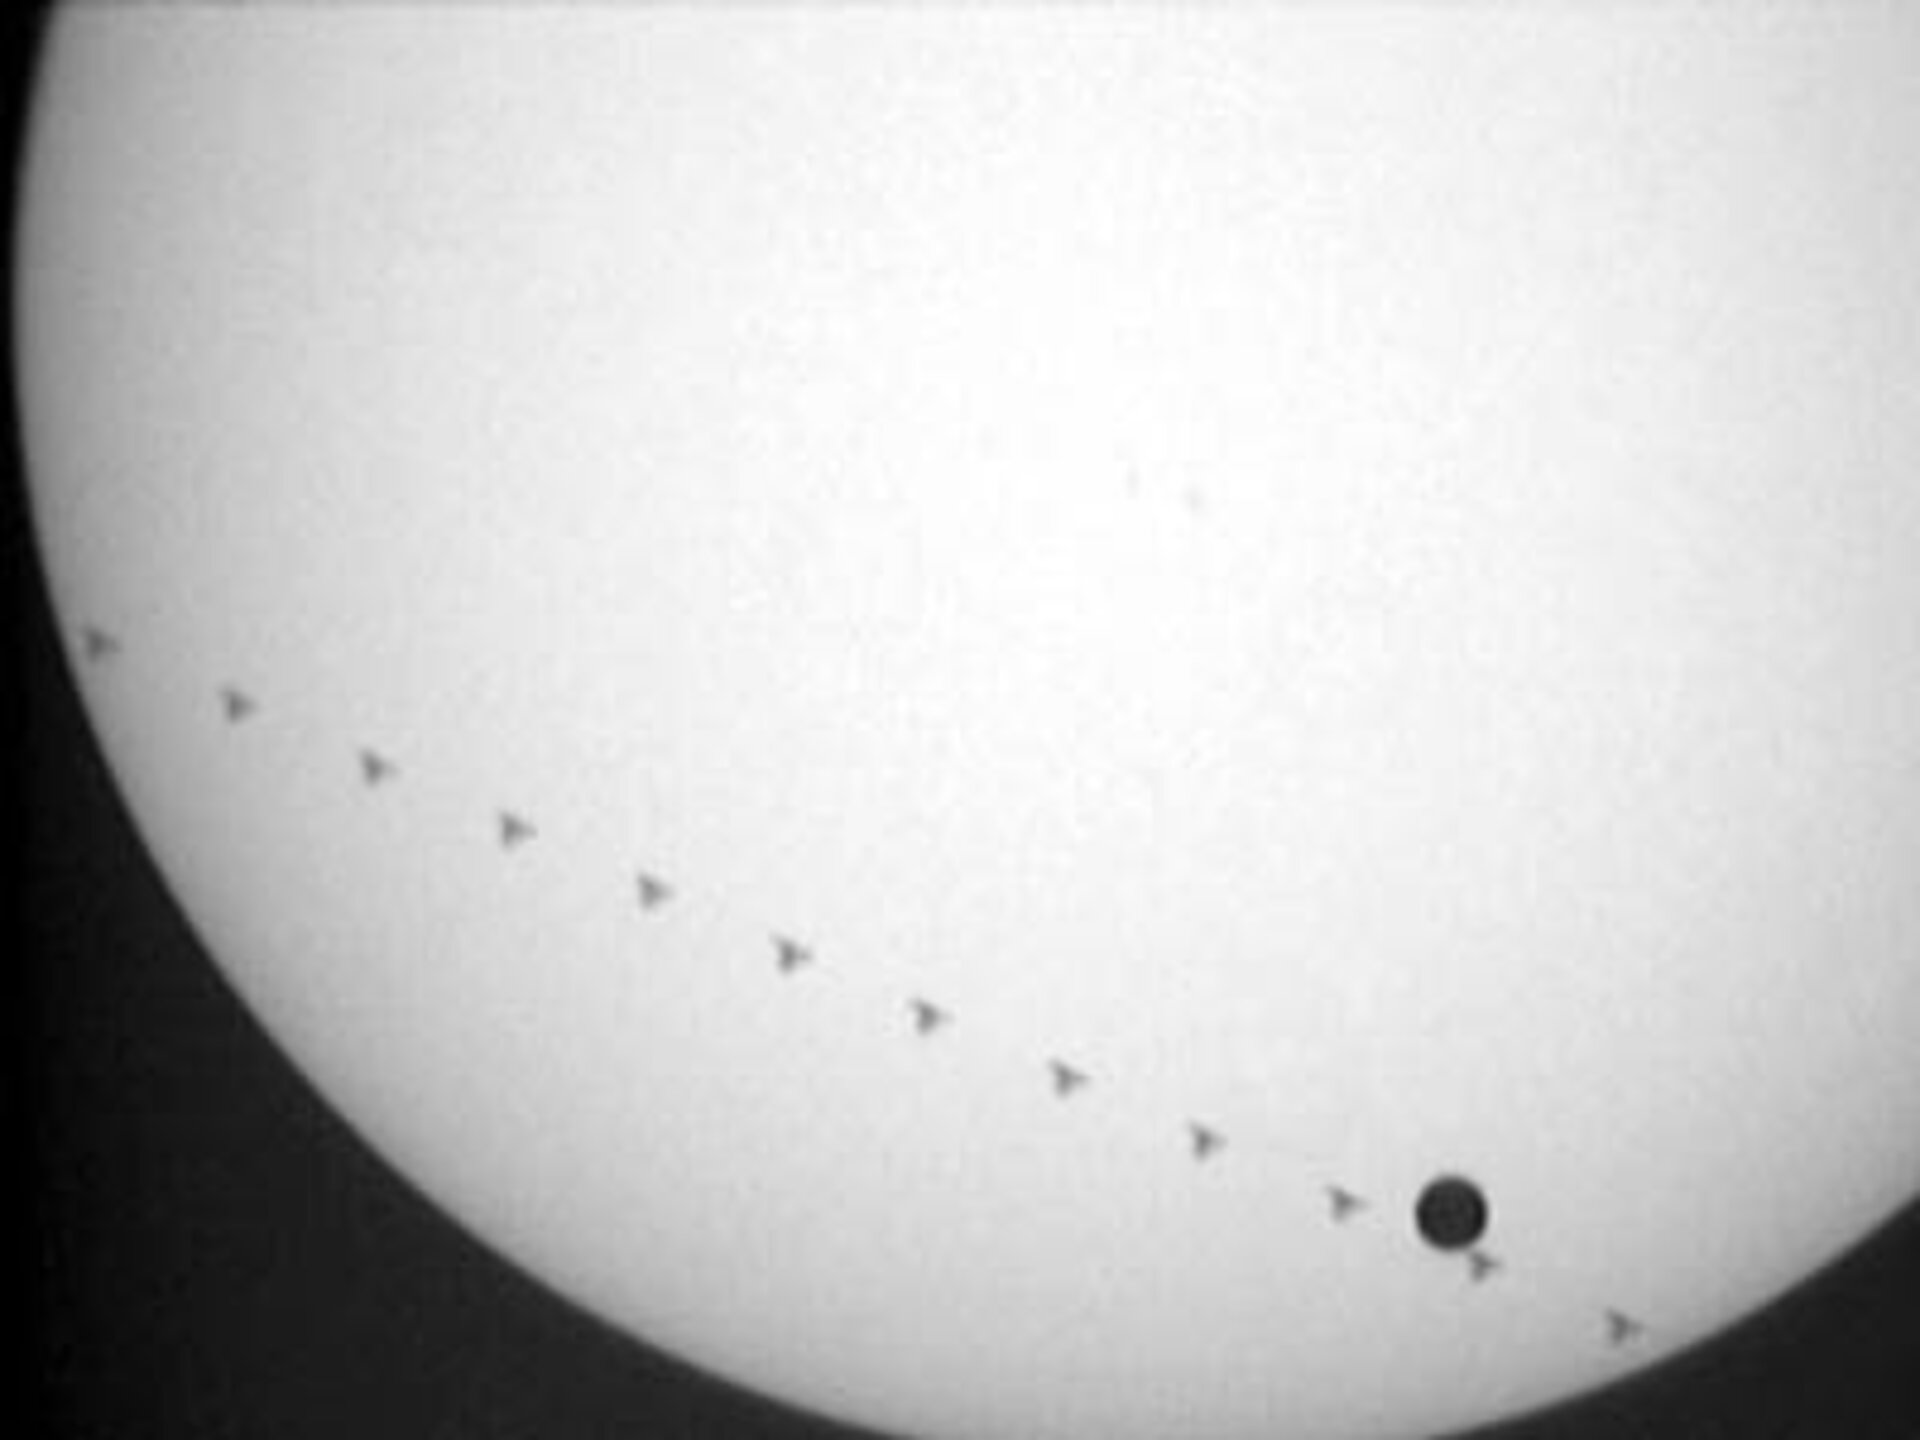 Dual transit of Venus and ISS on 8 June 2004